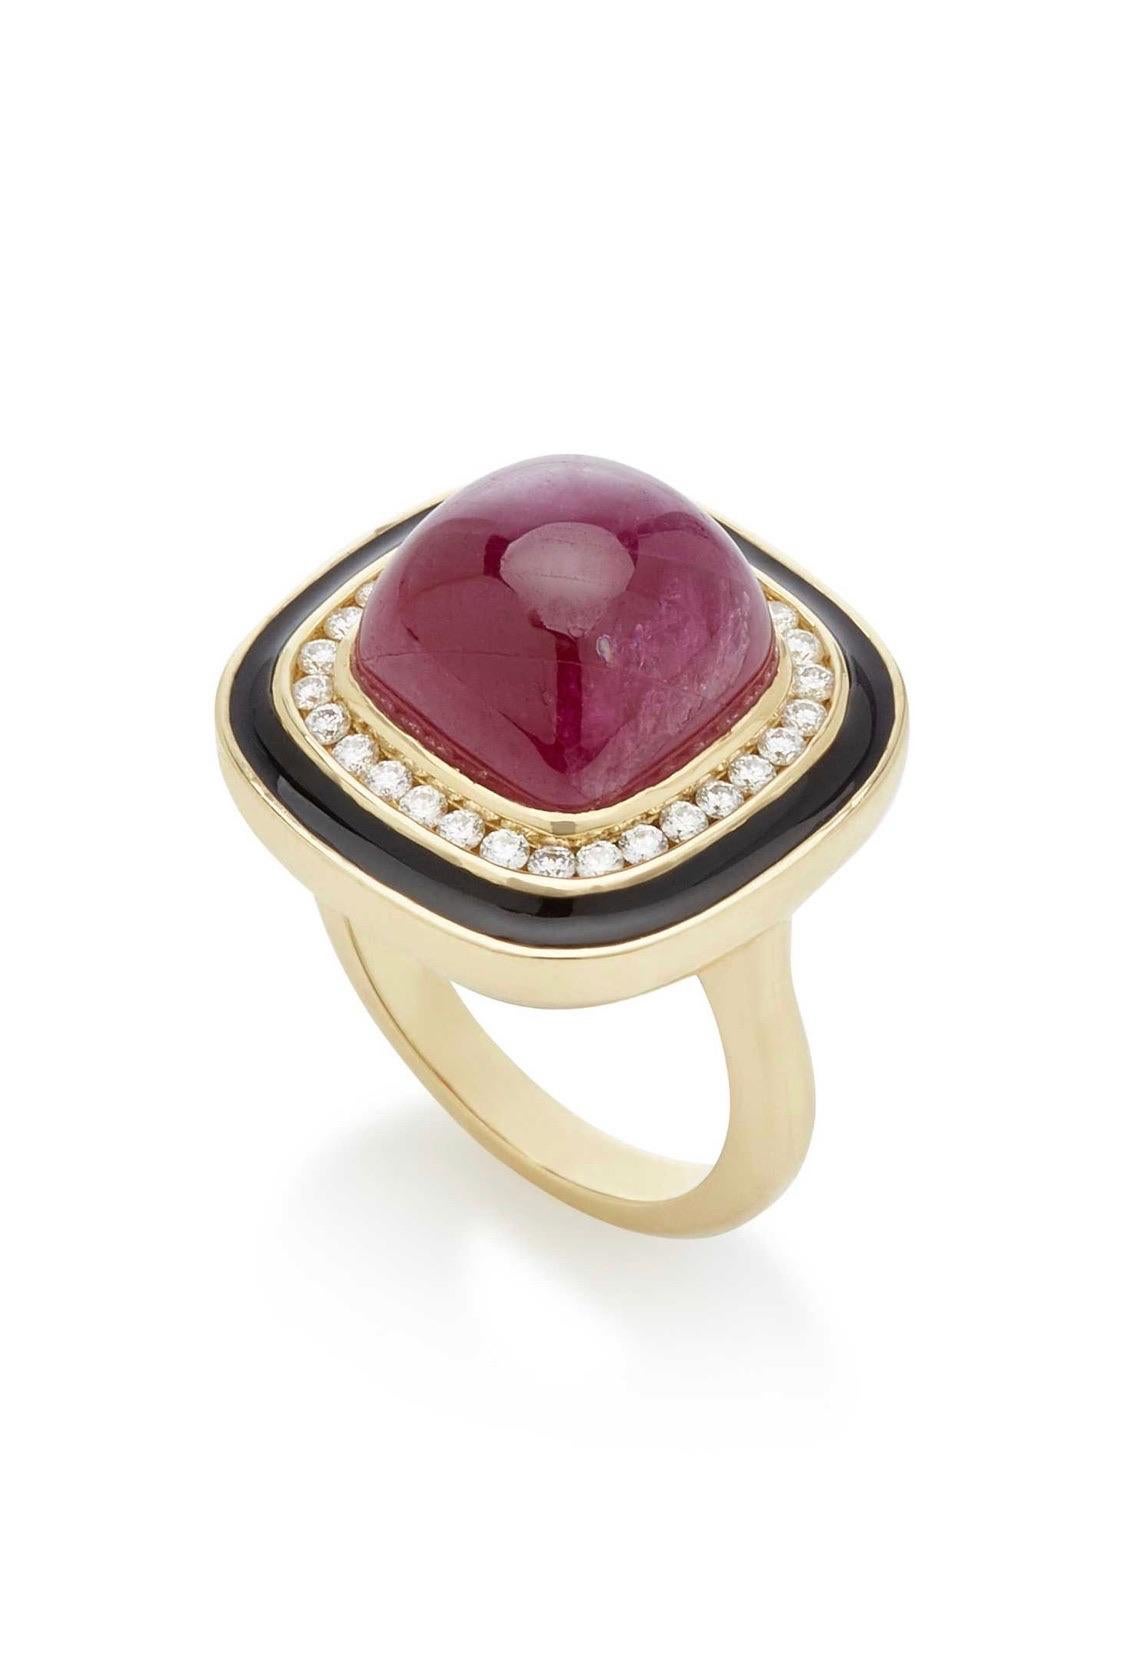 A very chic 15.26 carat sugarloaf cabochon Ruby, Diamond and black enamel ring that is part of Andrew Glassford's Museum Series Collection. It contains .48 carats of G/H VSI Diamonds. The ruby is a rich reddish color with a hint of pink that is